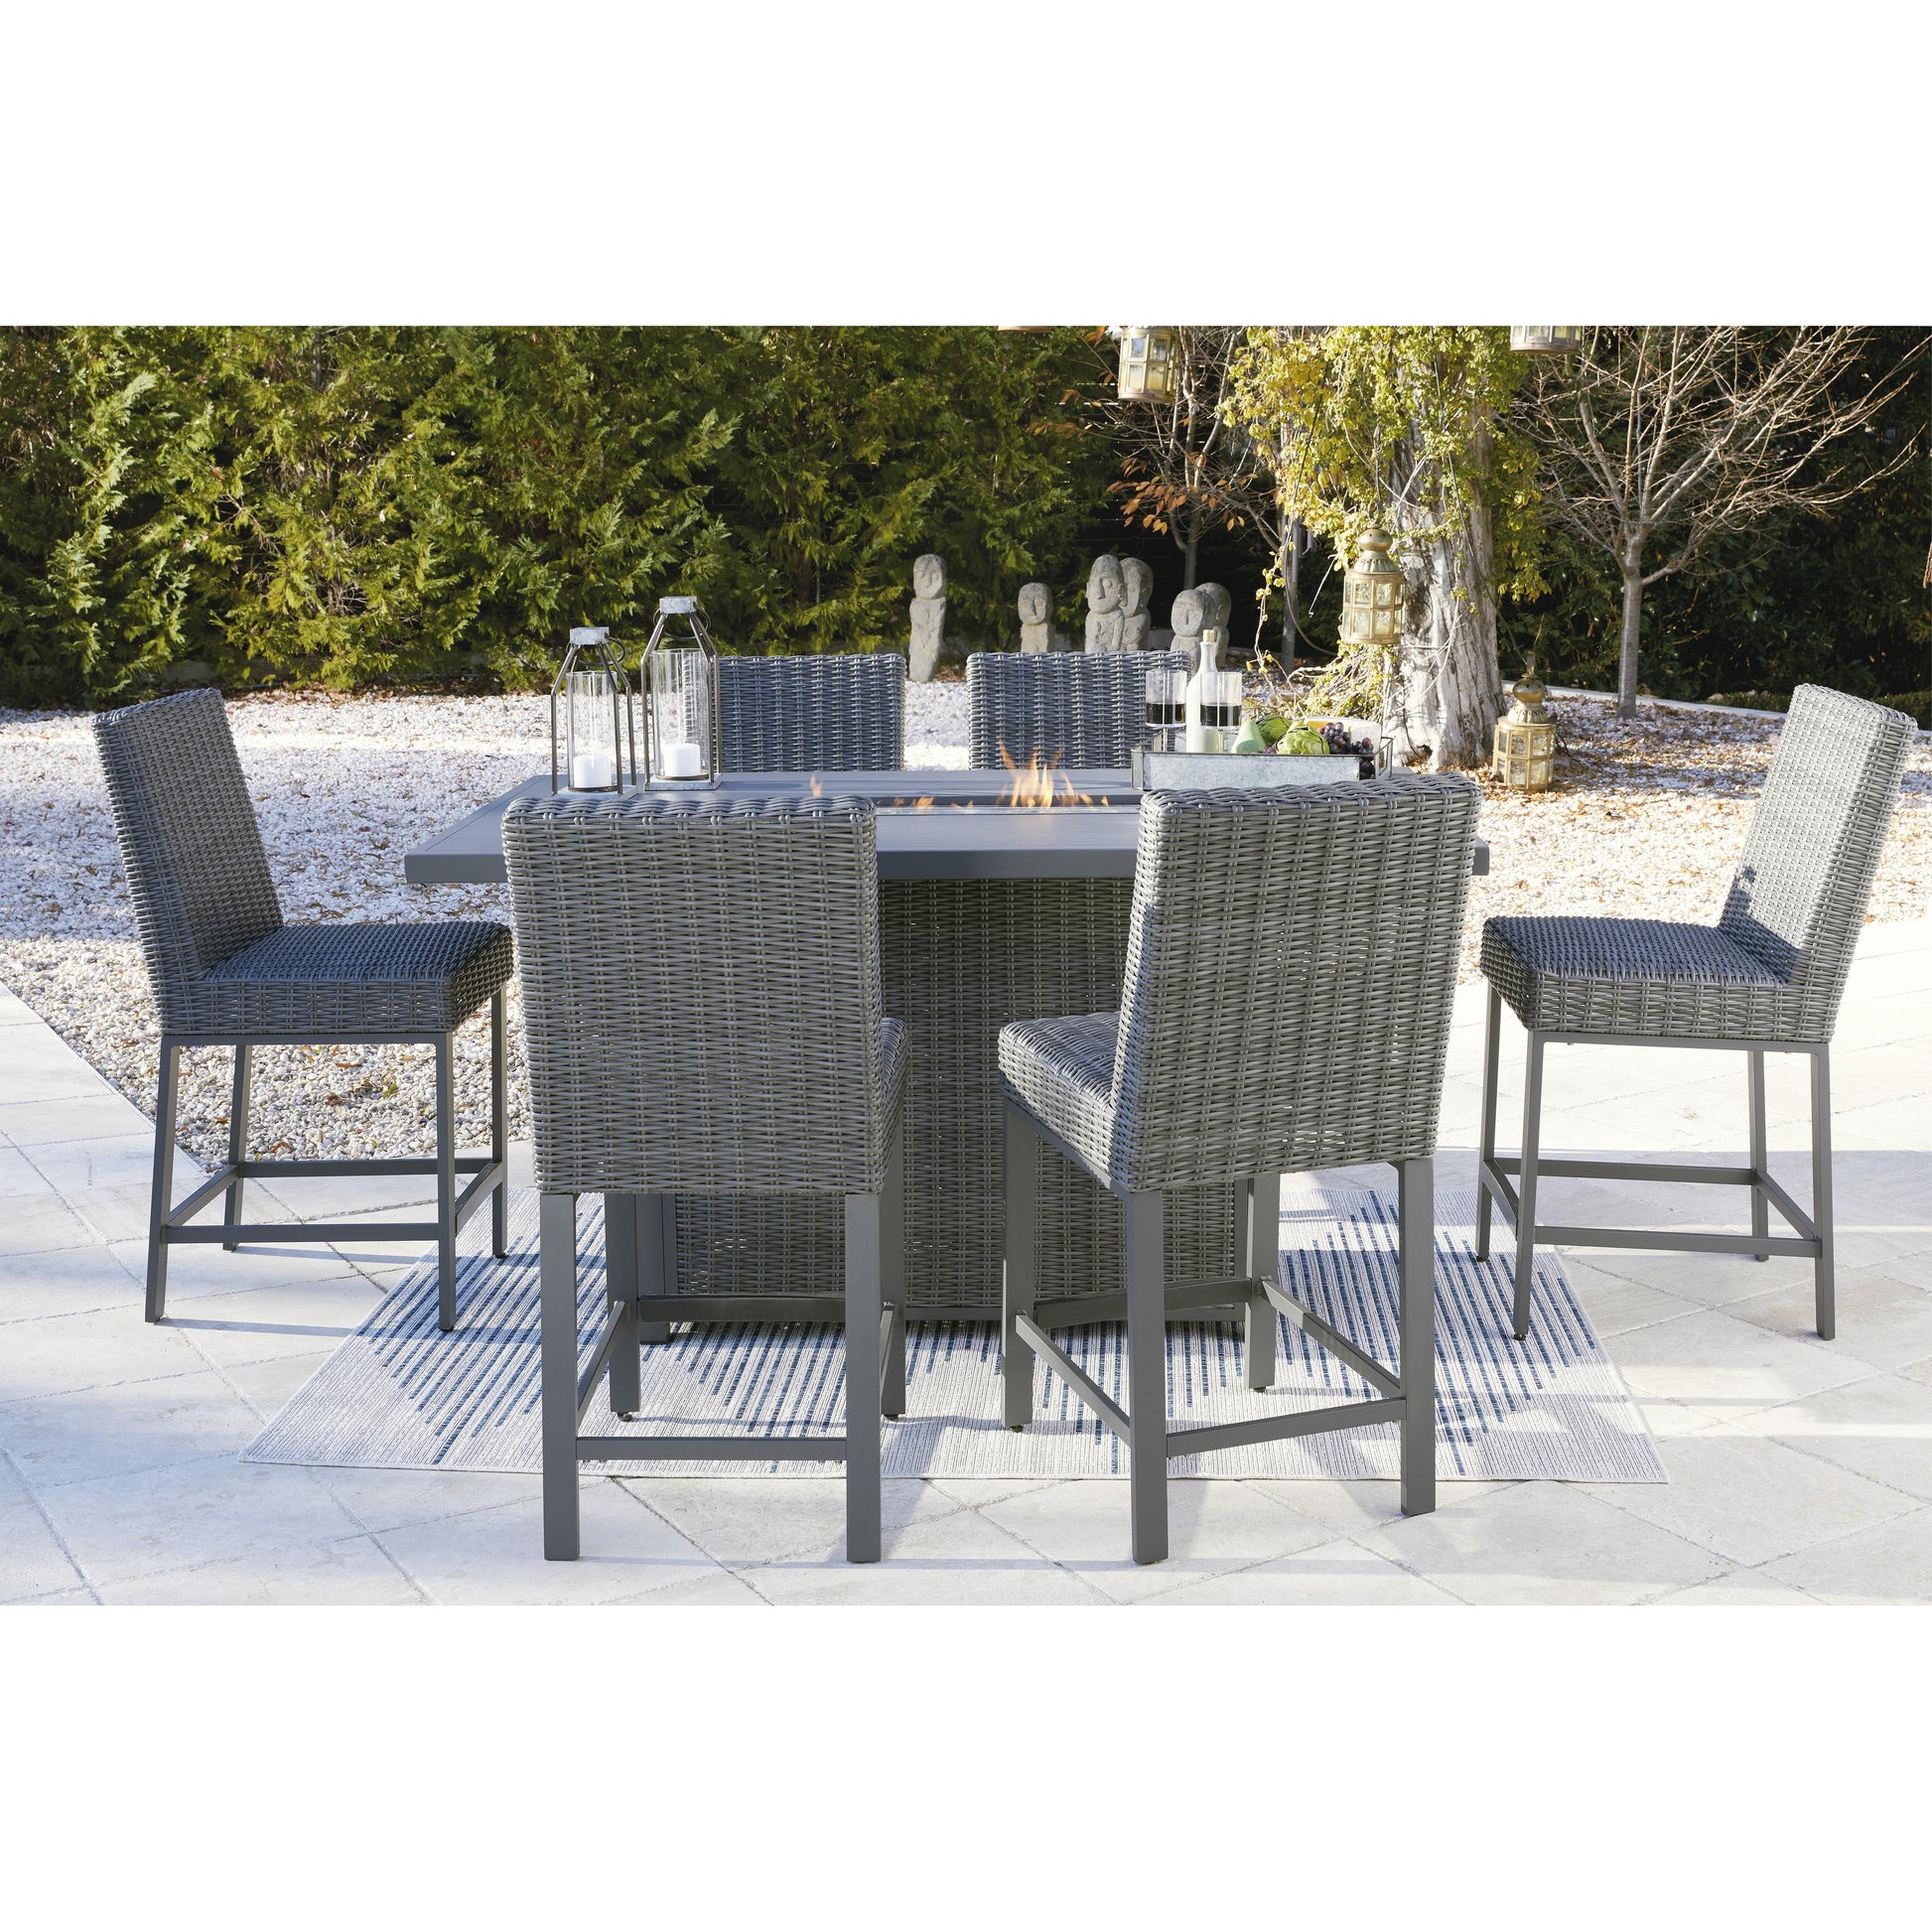 Signature Design by Ashley Outdoor Seating Stools P520-130 IMAGE 10